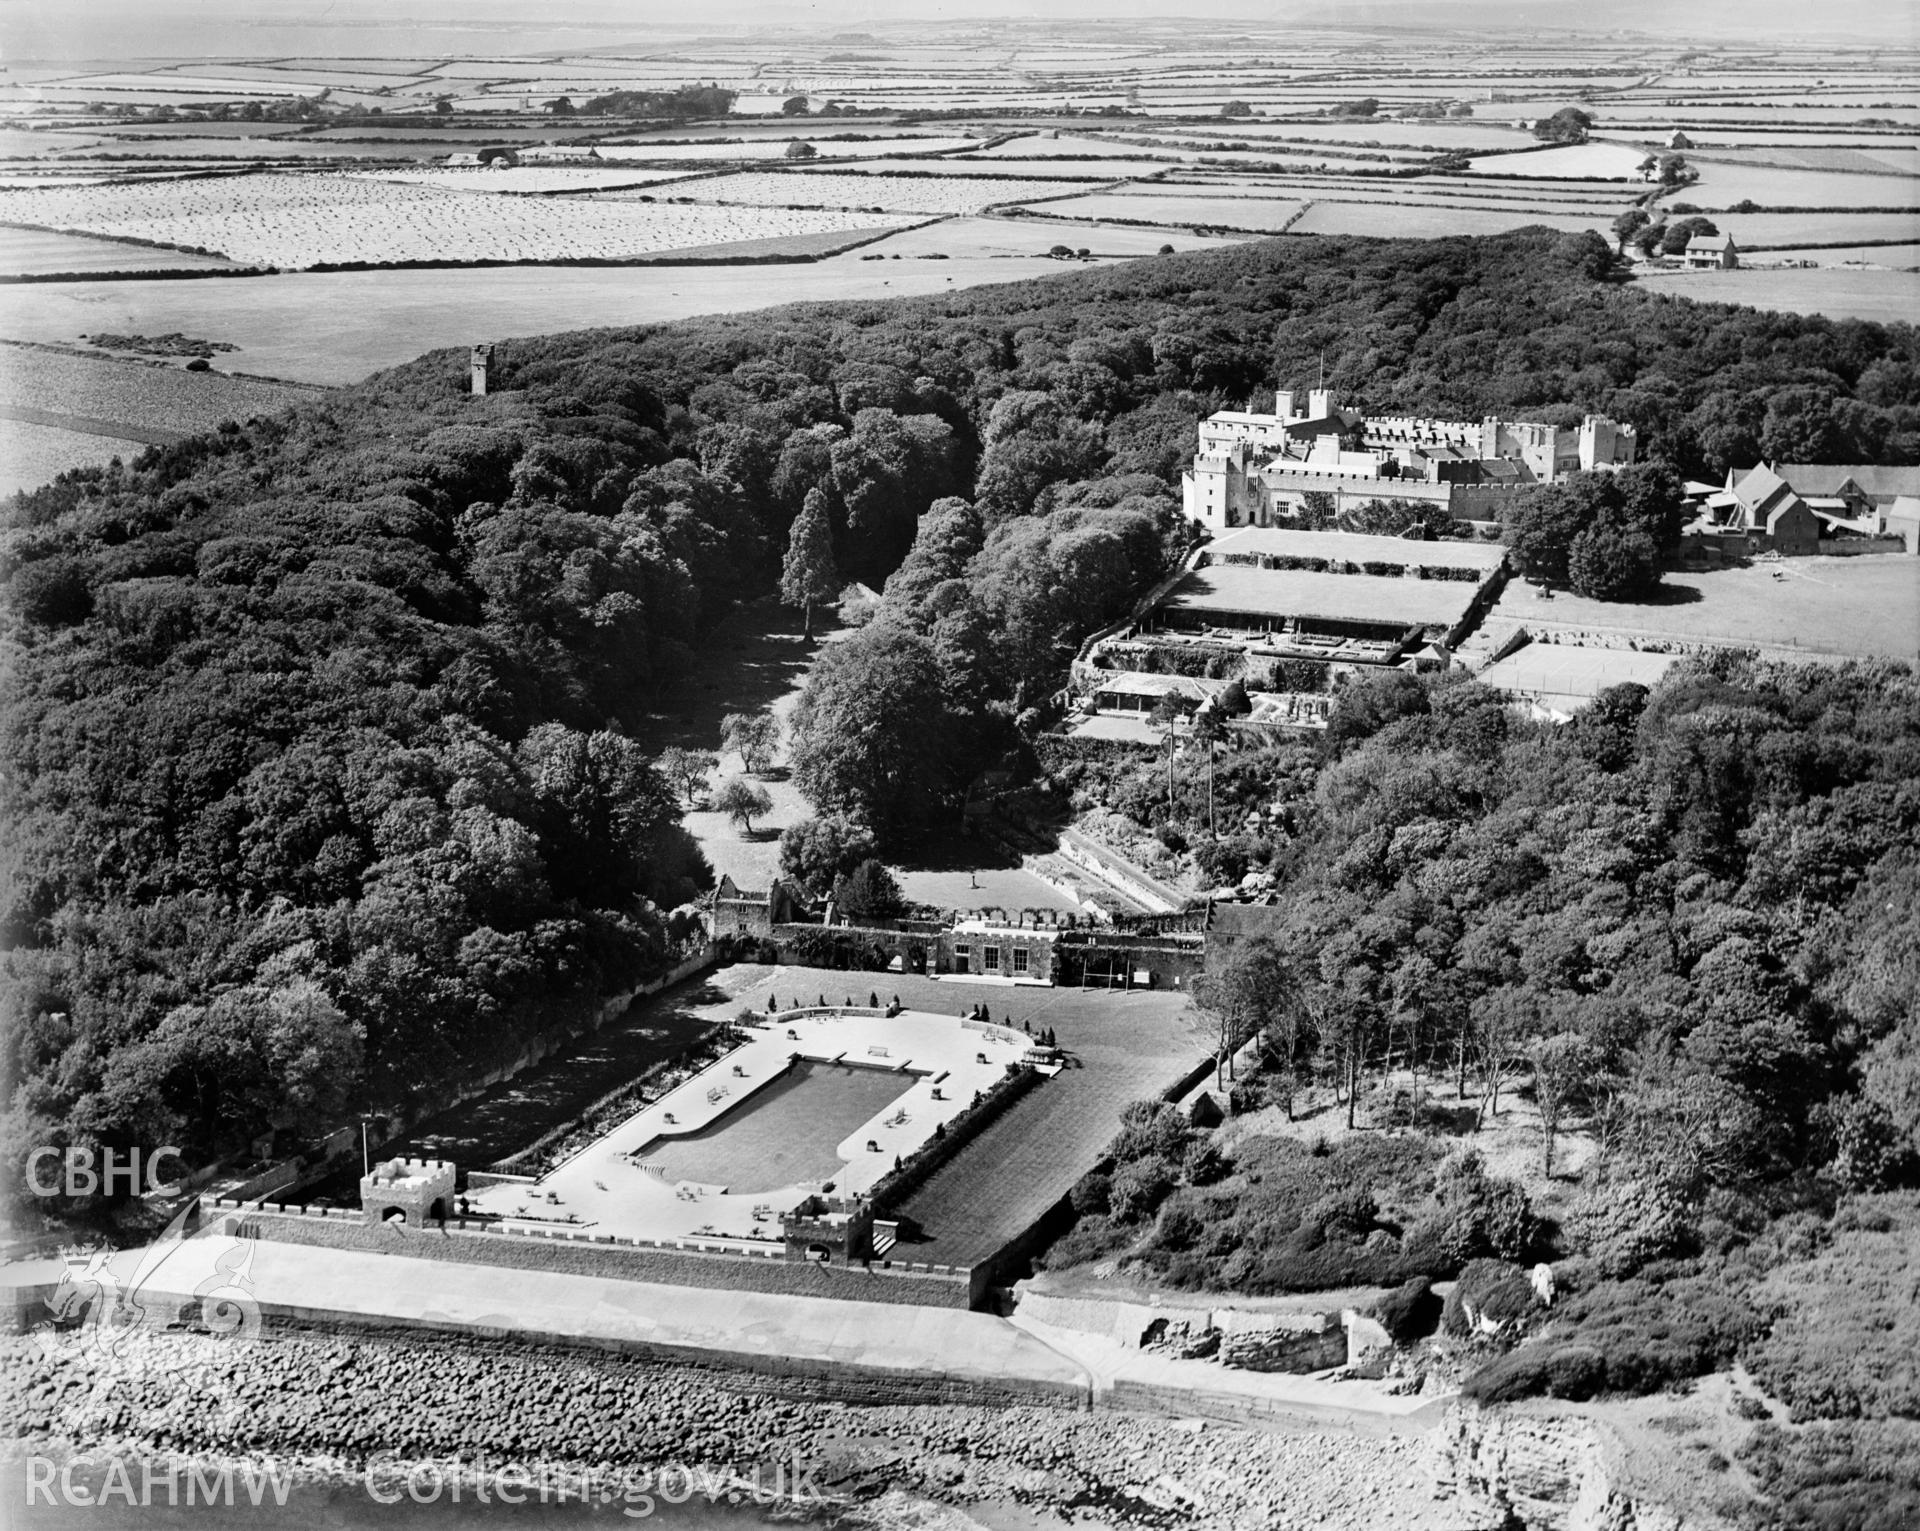 View of St Donats Castle showing castle, grounds and swimming pool, oblique aerial view. 5?x4? black and white glass plate negative.